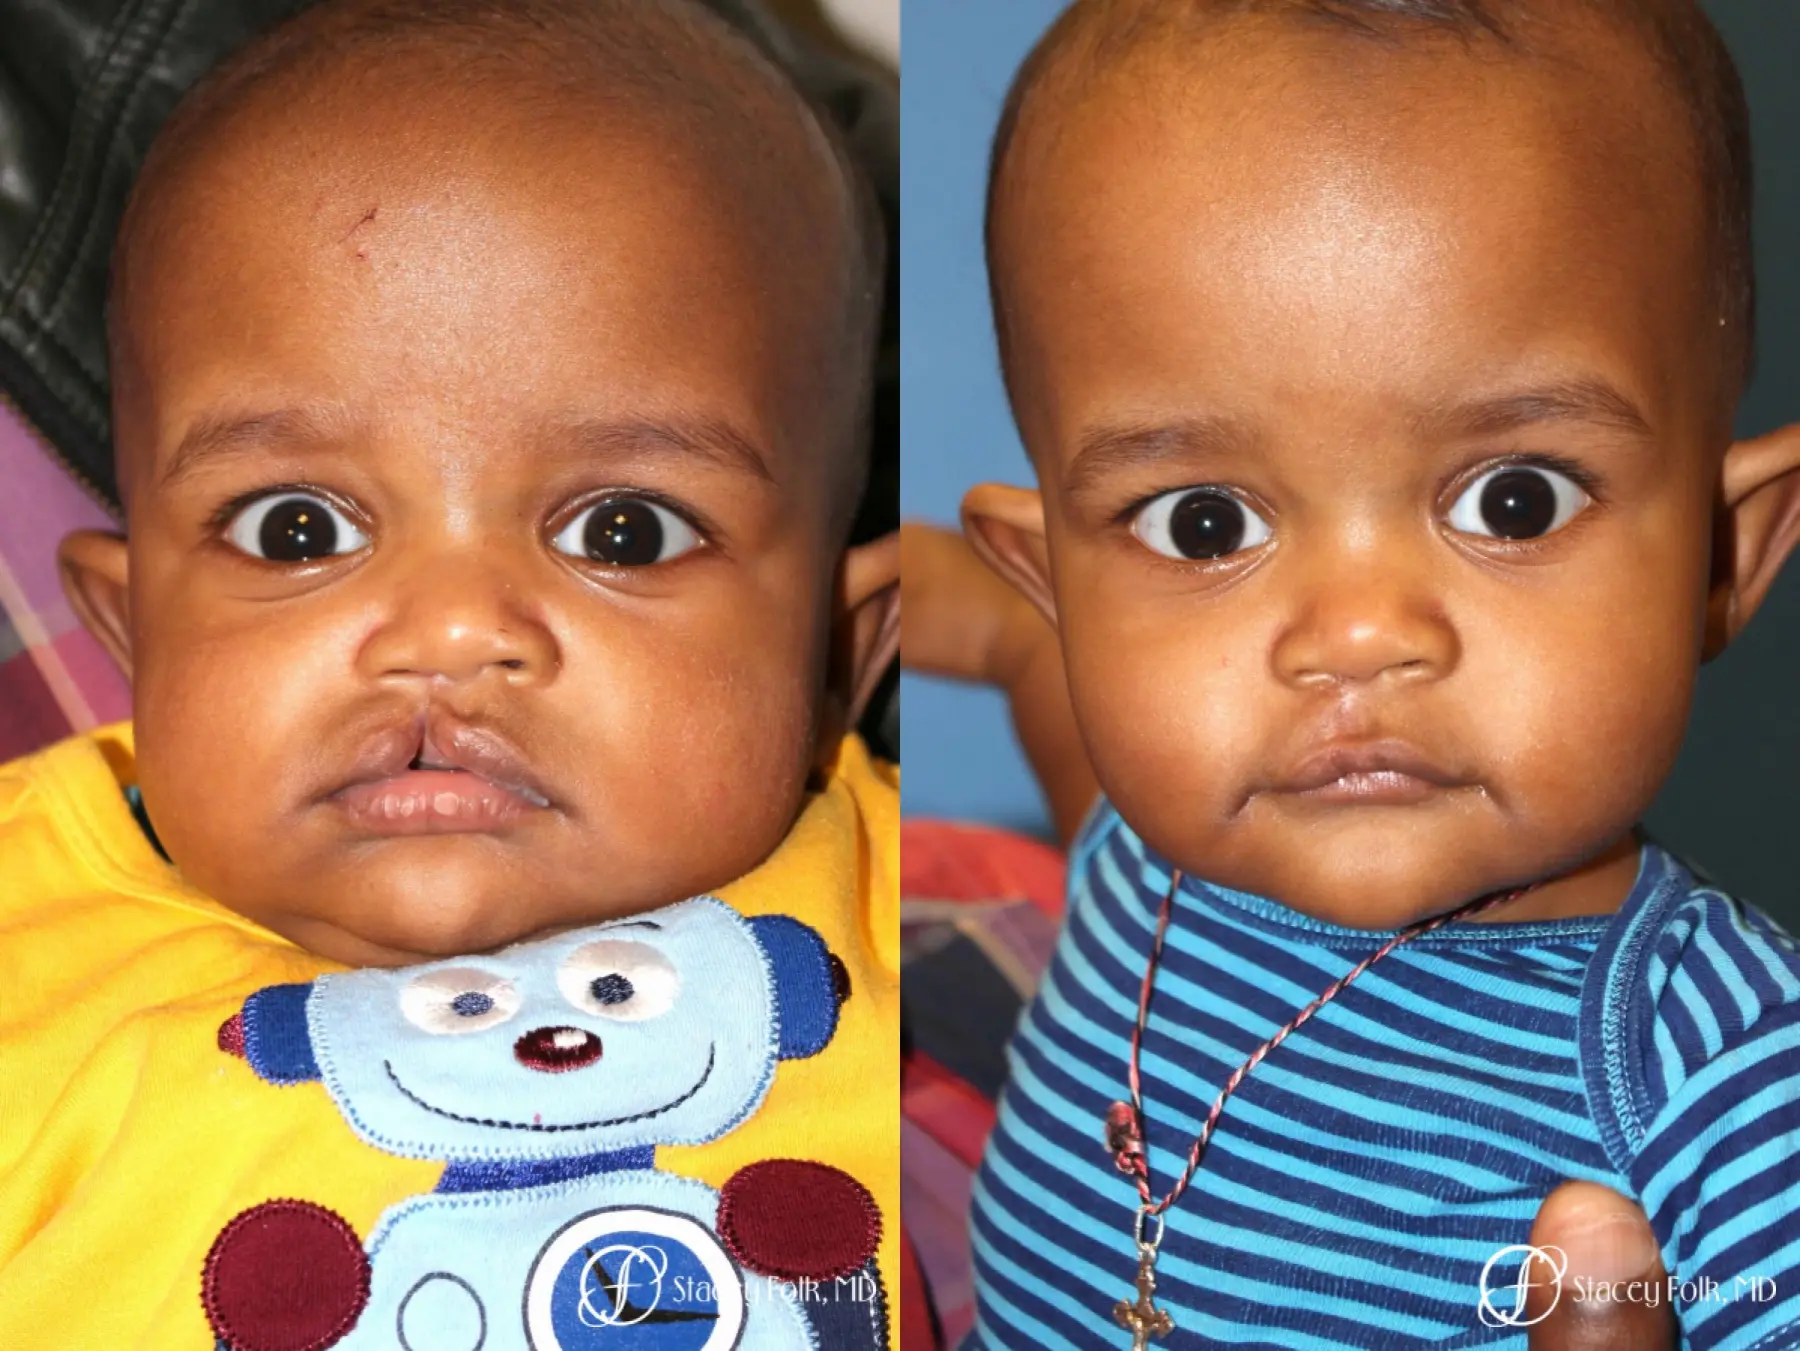 Denver Cleft lip repair 5934 - Before and After